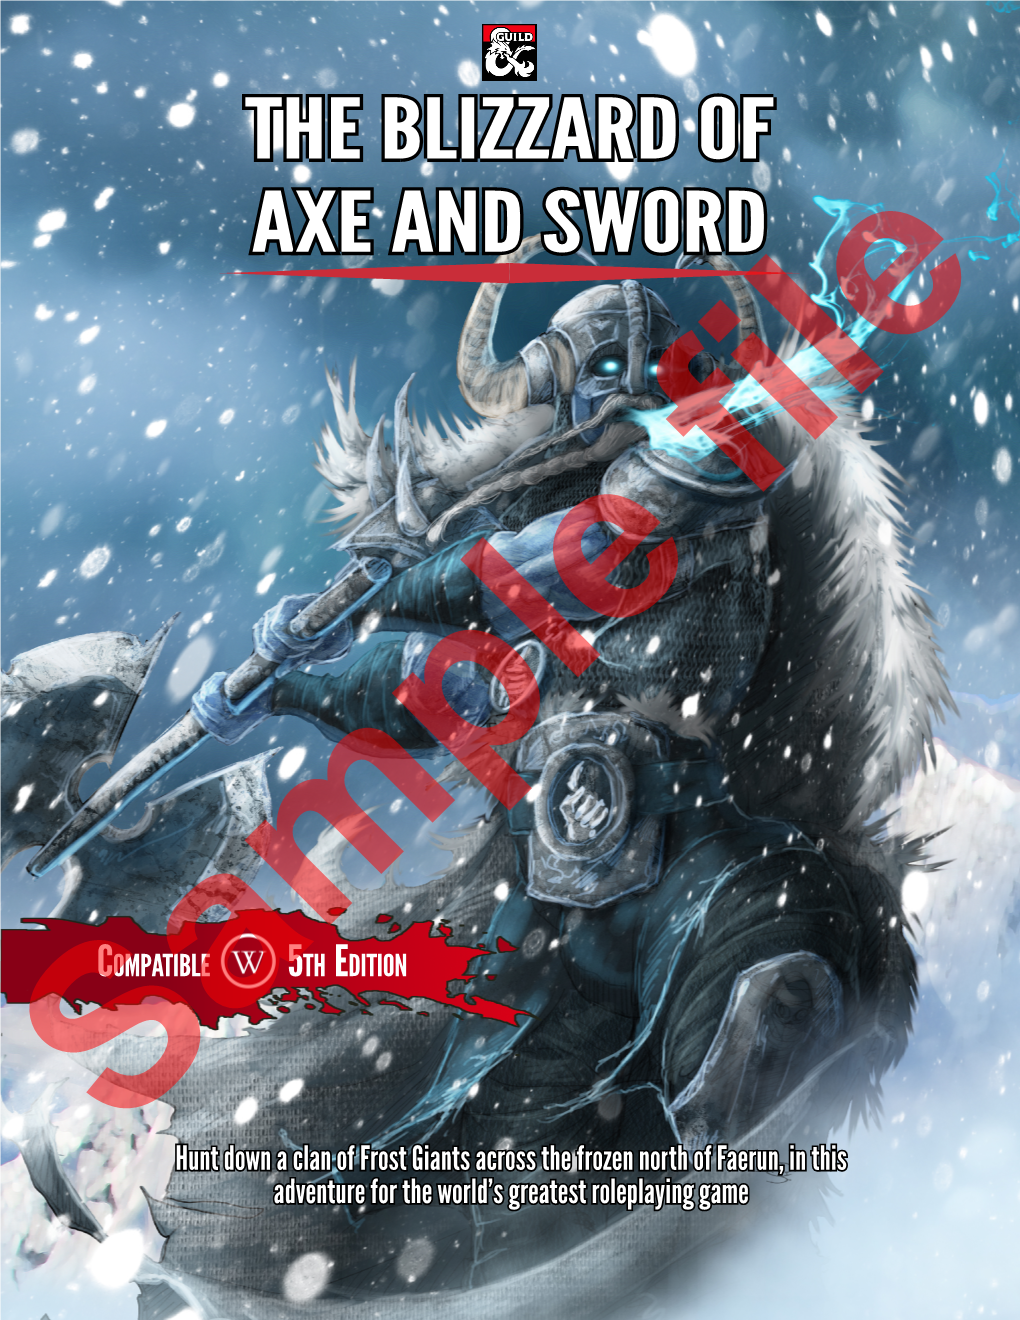 The Blizzard of Axe and Sword